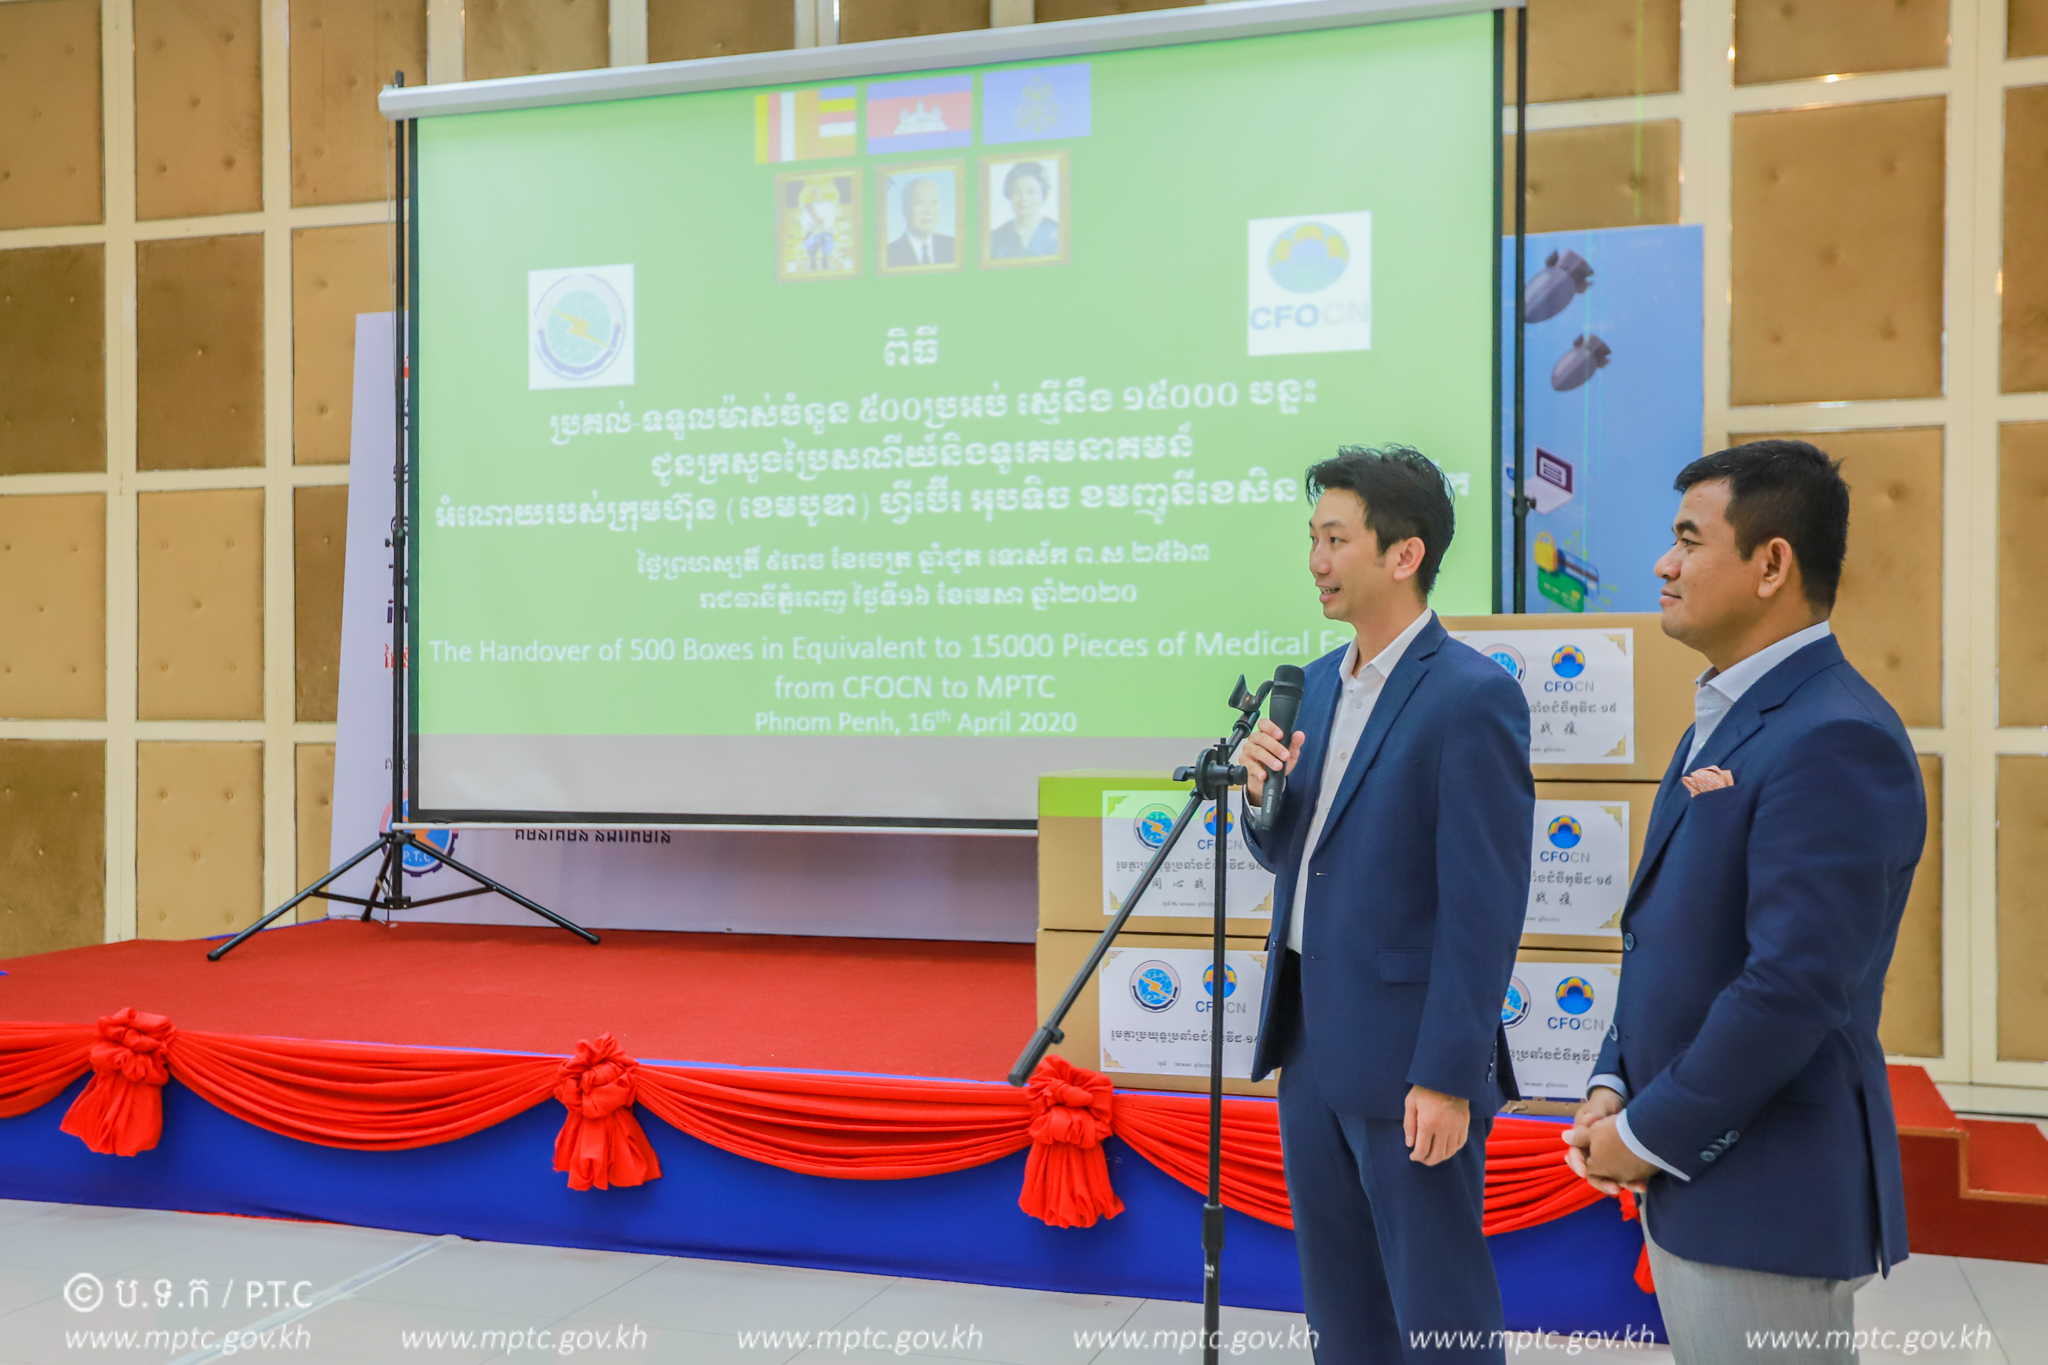 The Handover of 500 Boxes in Equivalent to 150,00 Pieces of Medical Mask from Cambodia Fiber Optic Communication Network (CFOCN)